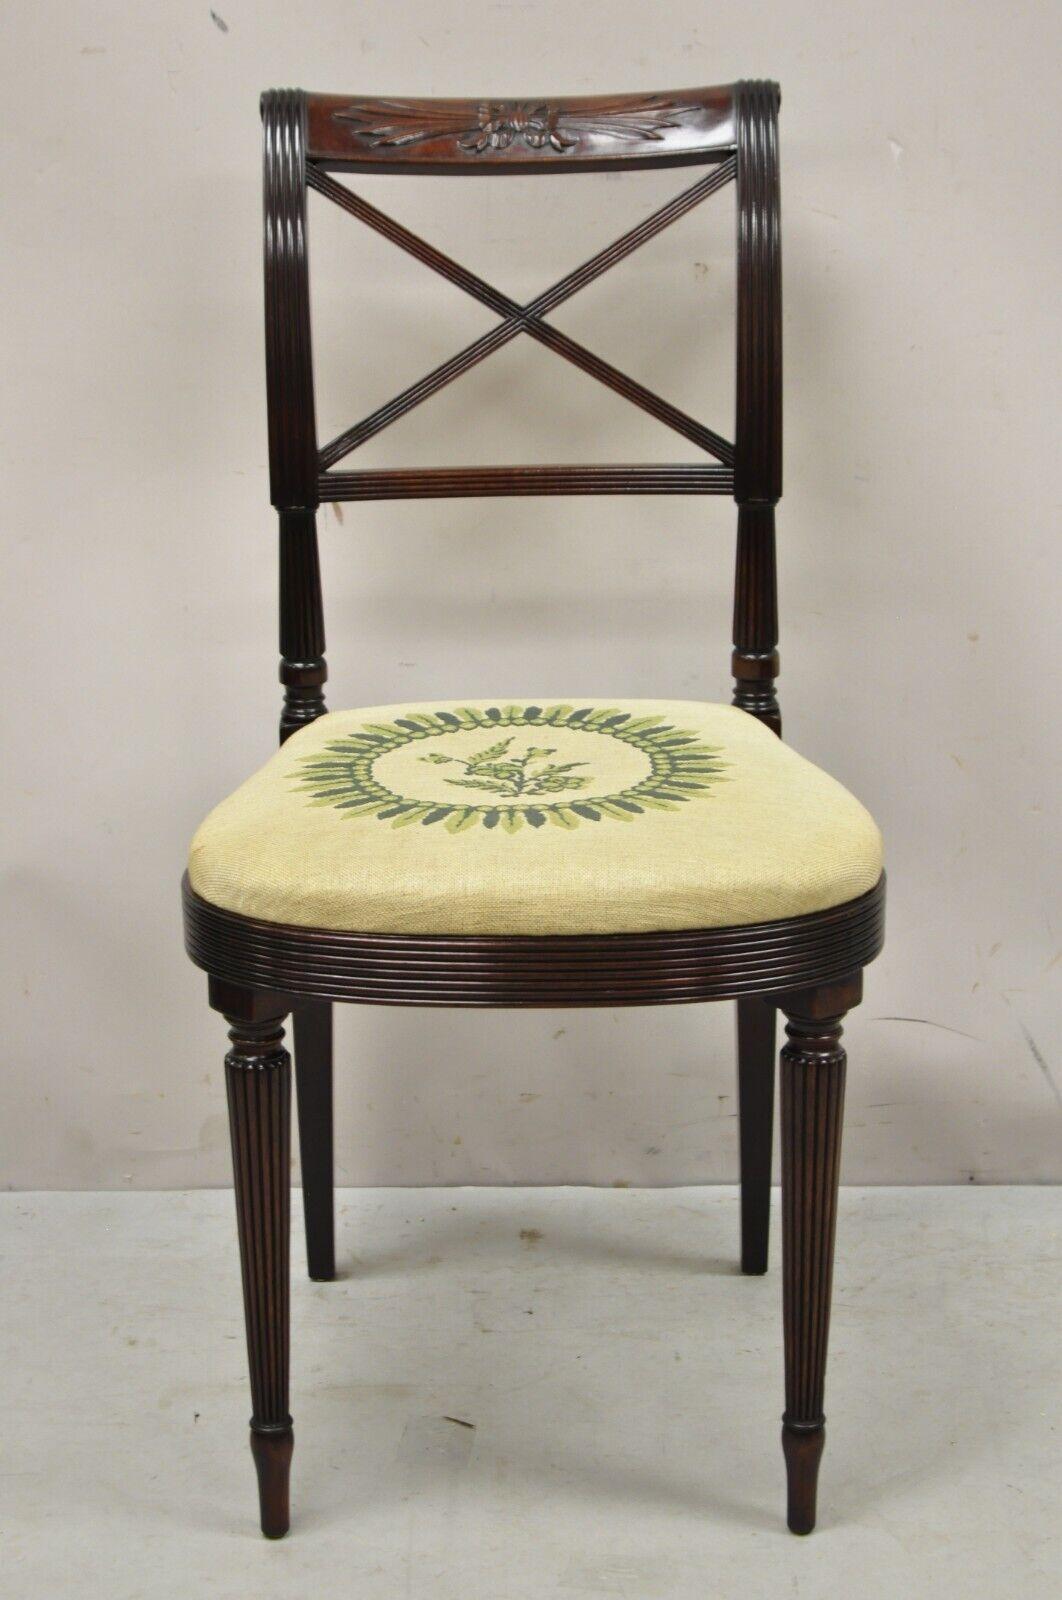 Vintage Mahogany Regency Federal Style X-Form Accent side chair. Item features a tapestry seat, ribbon carved upper rai, x-form backrest, solid wood frame, beautiful wood grain, tapered legs, very nice antique item, great style and form. Circa Early